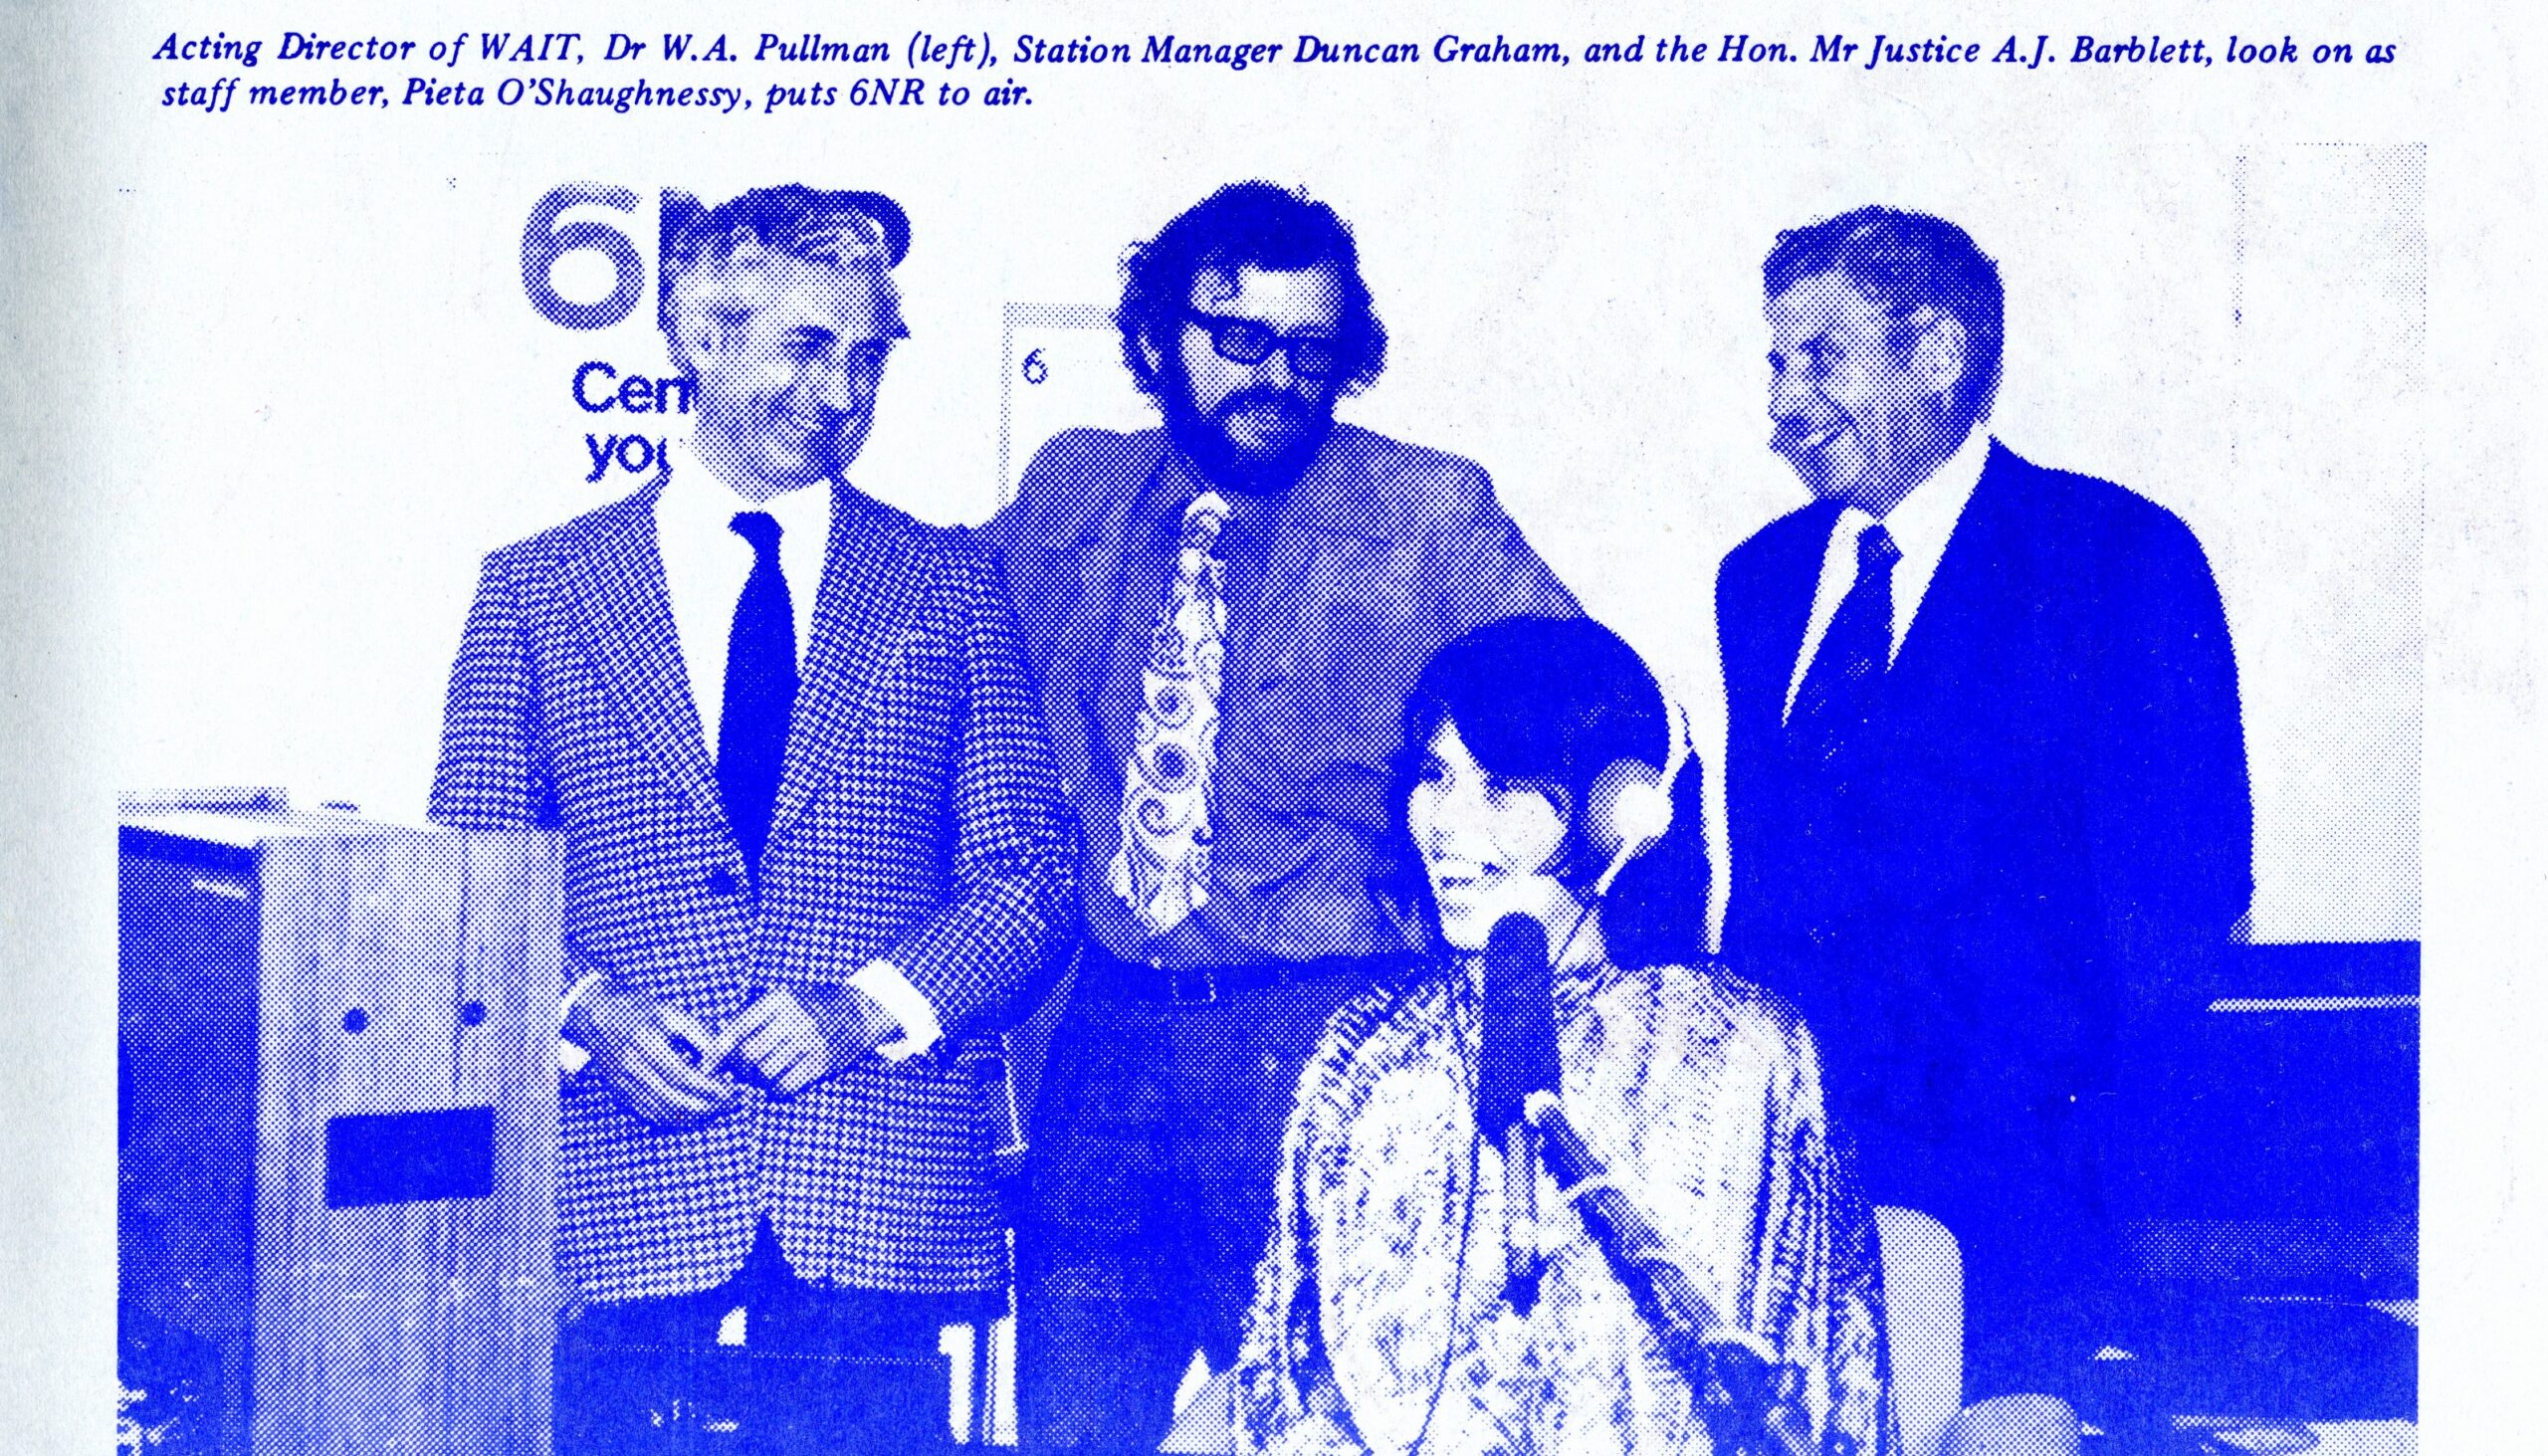 Blue monotone image of 3 men in suits smiling behind a woman sitting at a microphone. Caption reads 